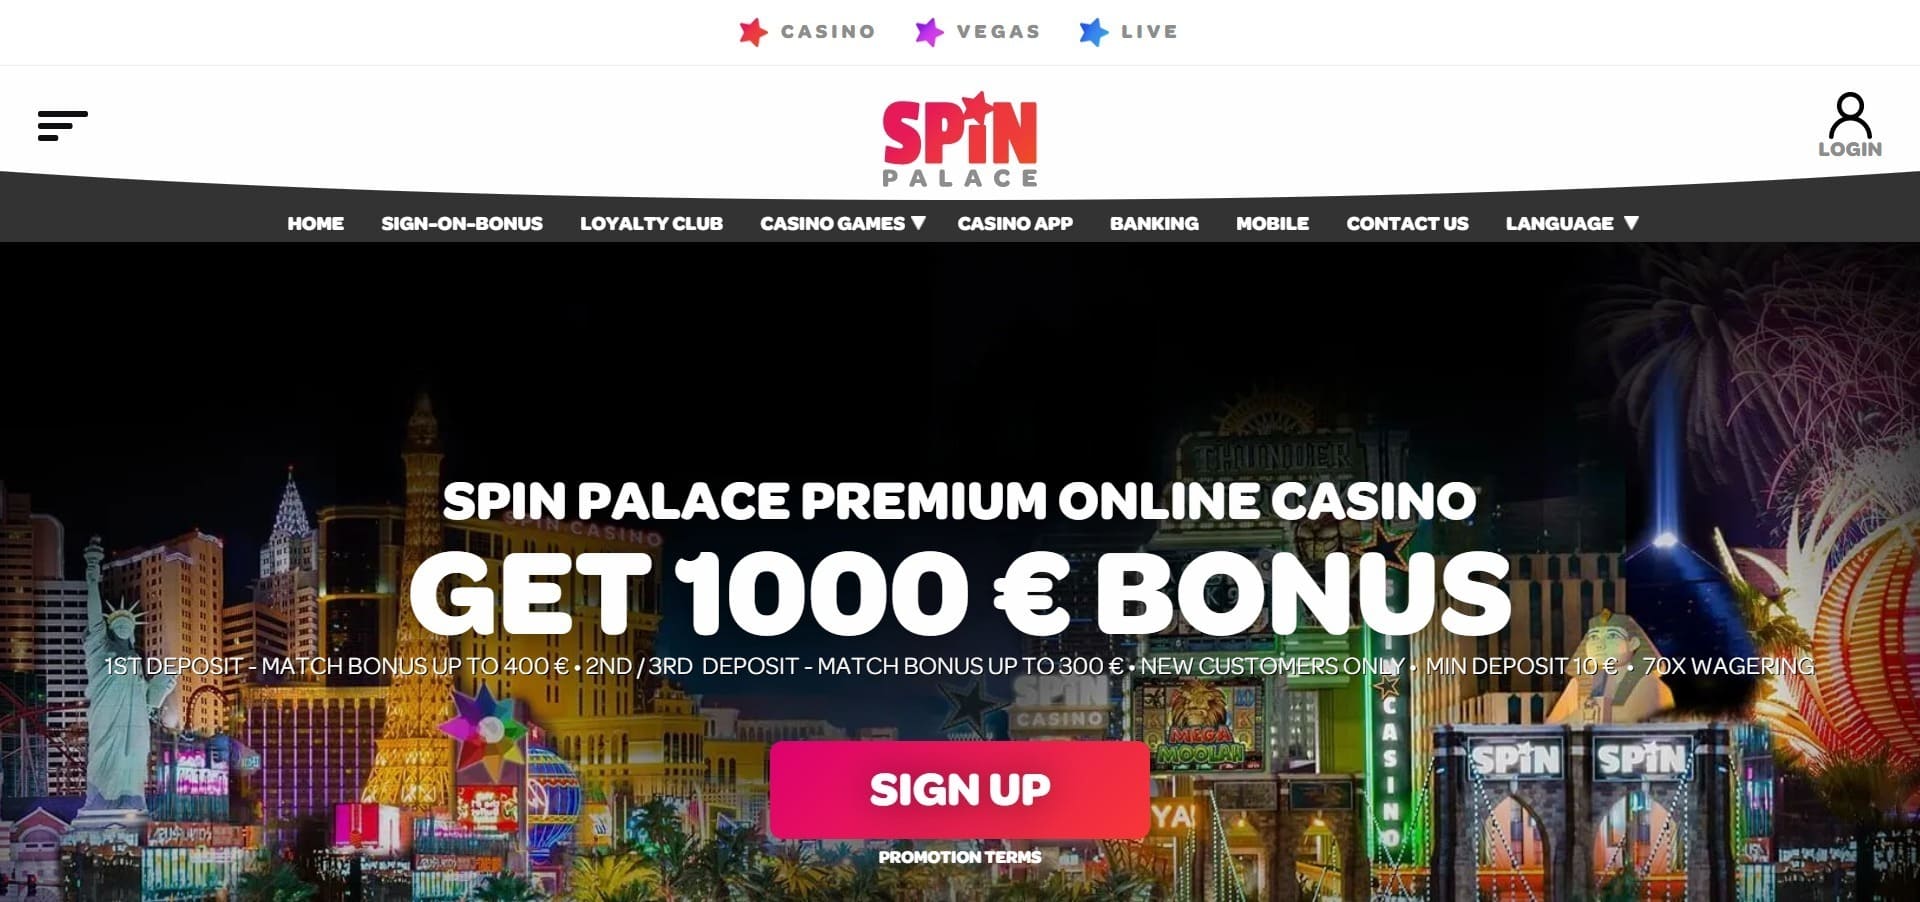 Spin Palace Casino mobile application